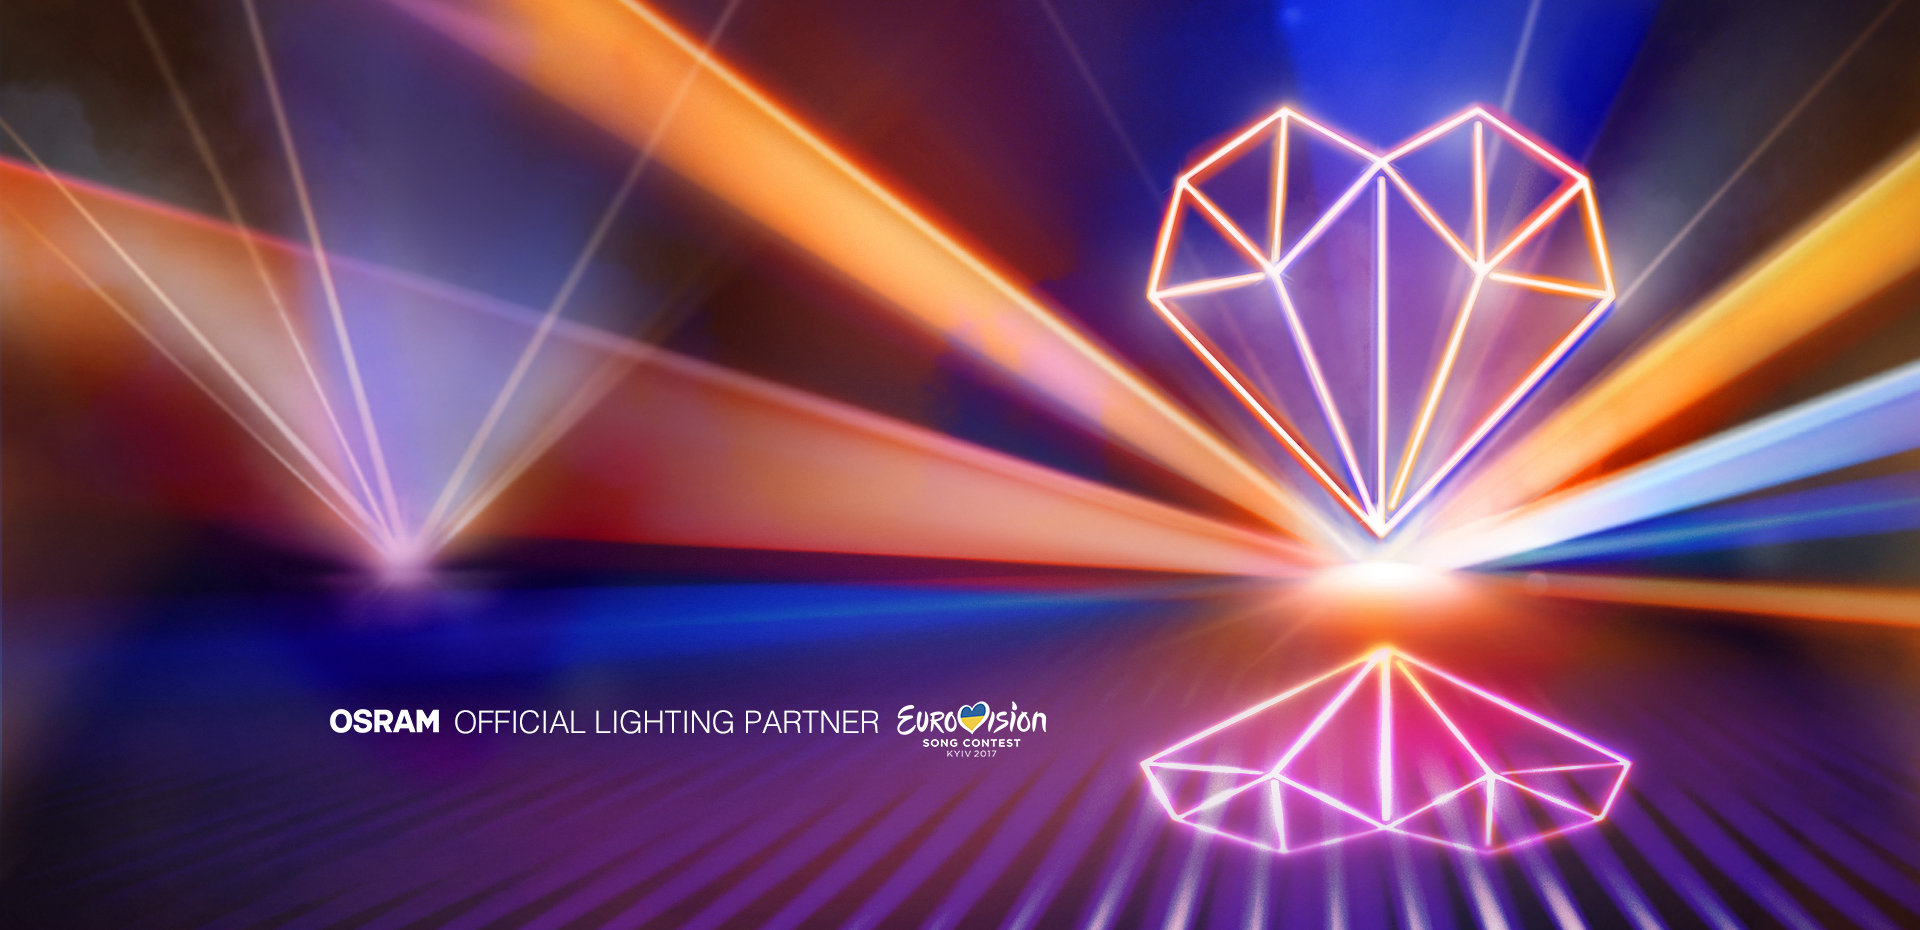 Eurovision Song Contest: Great emotions, great lightshow, light voting in Kyiv.